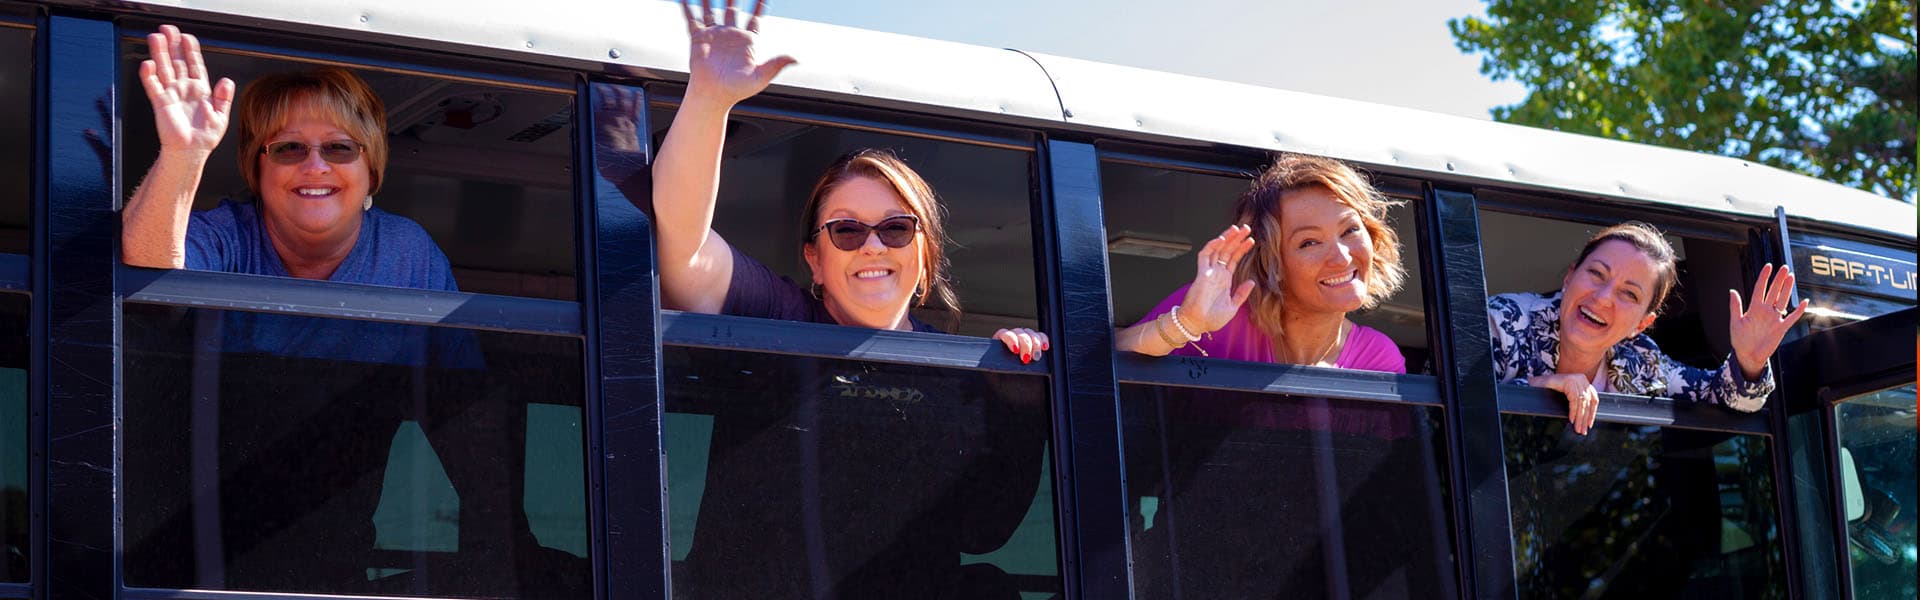 A group of teachers waving in the windows of a school bus